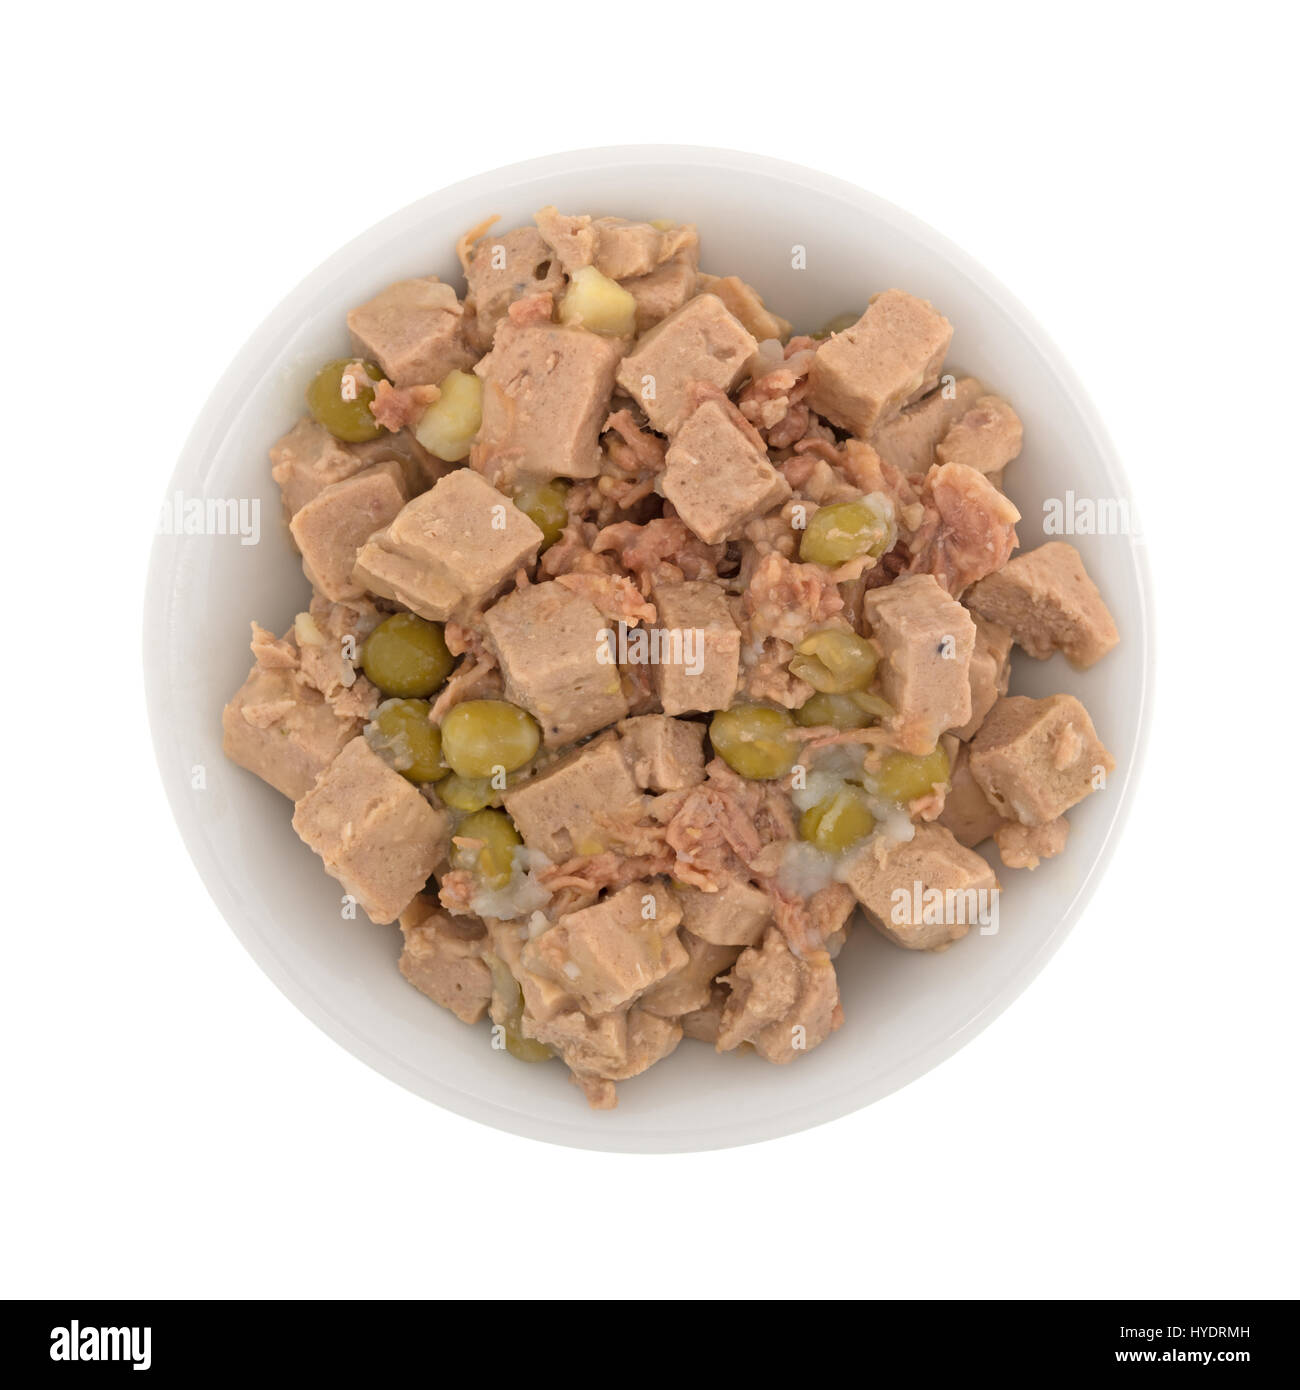 Top view of a bowl of lamb and duck with vegetables gourmet dog food isolated on a white background. Stock Photo